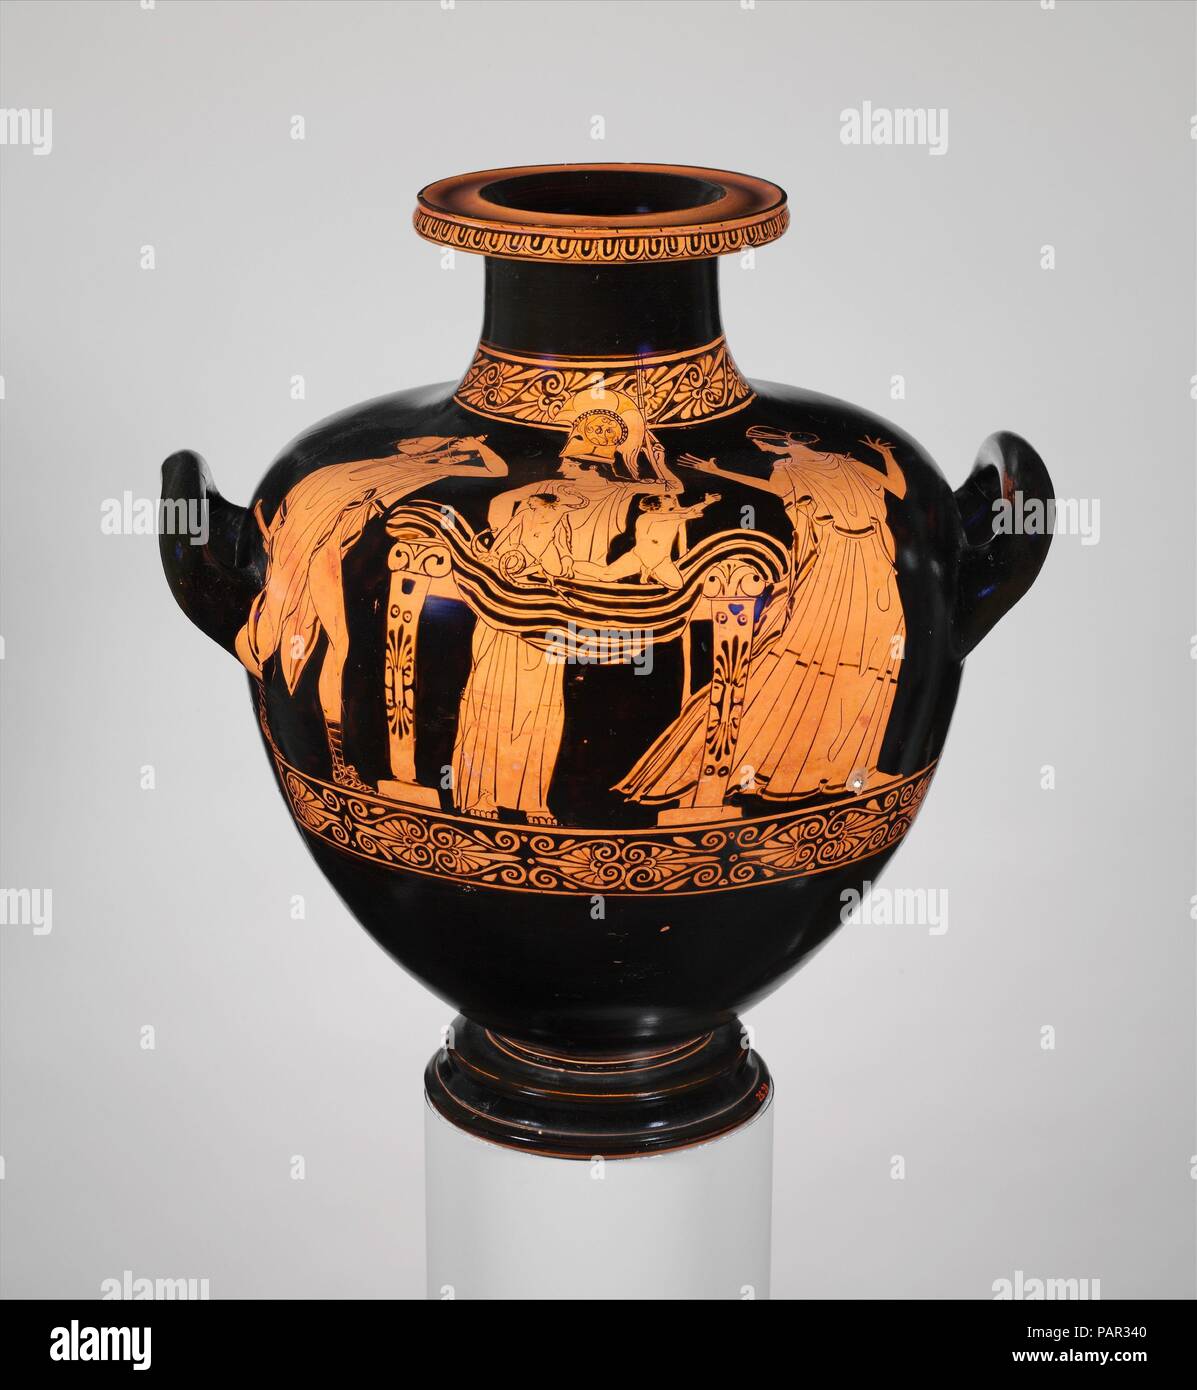 Terracotta hydria: kalpis (water jar). Culture: Greek, Attic. Dimensions: H. 14 1/2 in. (36.8 cm)  diameter without handles  11 5/16 in. (28.7 cm). Date: ca. 460-450 B.C..  The infant Herakles strangling snakes sent by the goddess Hera  Herakles, the greatest of the Greek heroes, was one of twins conceived in a night when Alkmene, the wife of Amphitryon, was visited by both her husband and the god Zeus.  Angered by his infidelity, Zeus's wife, Hera, tried to kill the infant Herakles with snakes.  Here the child strangles them in the presence of his parents and Athena, his protective goddess. M Stock Photo